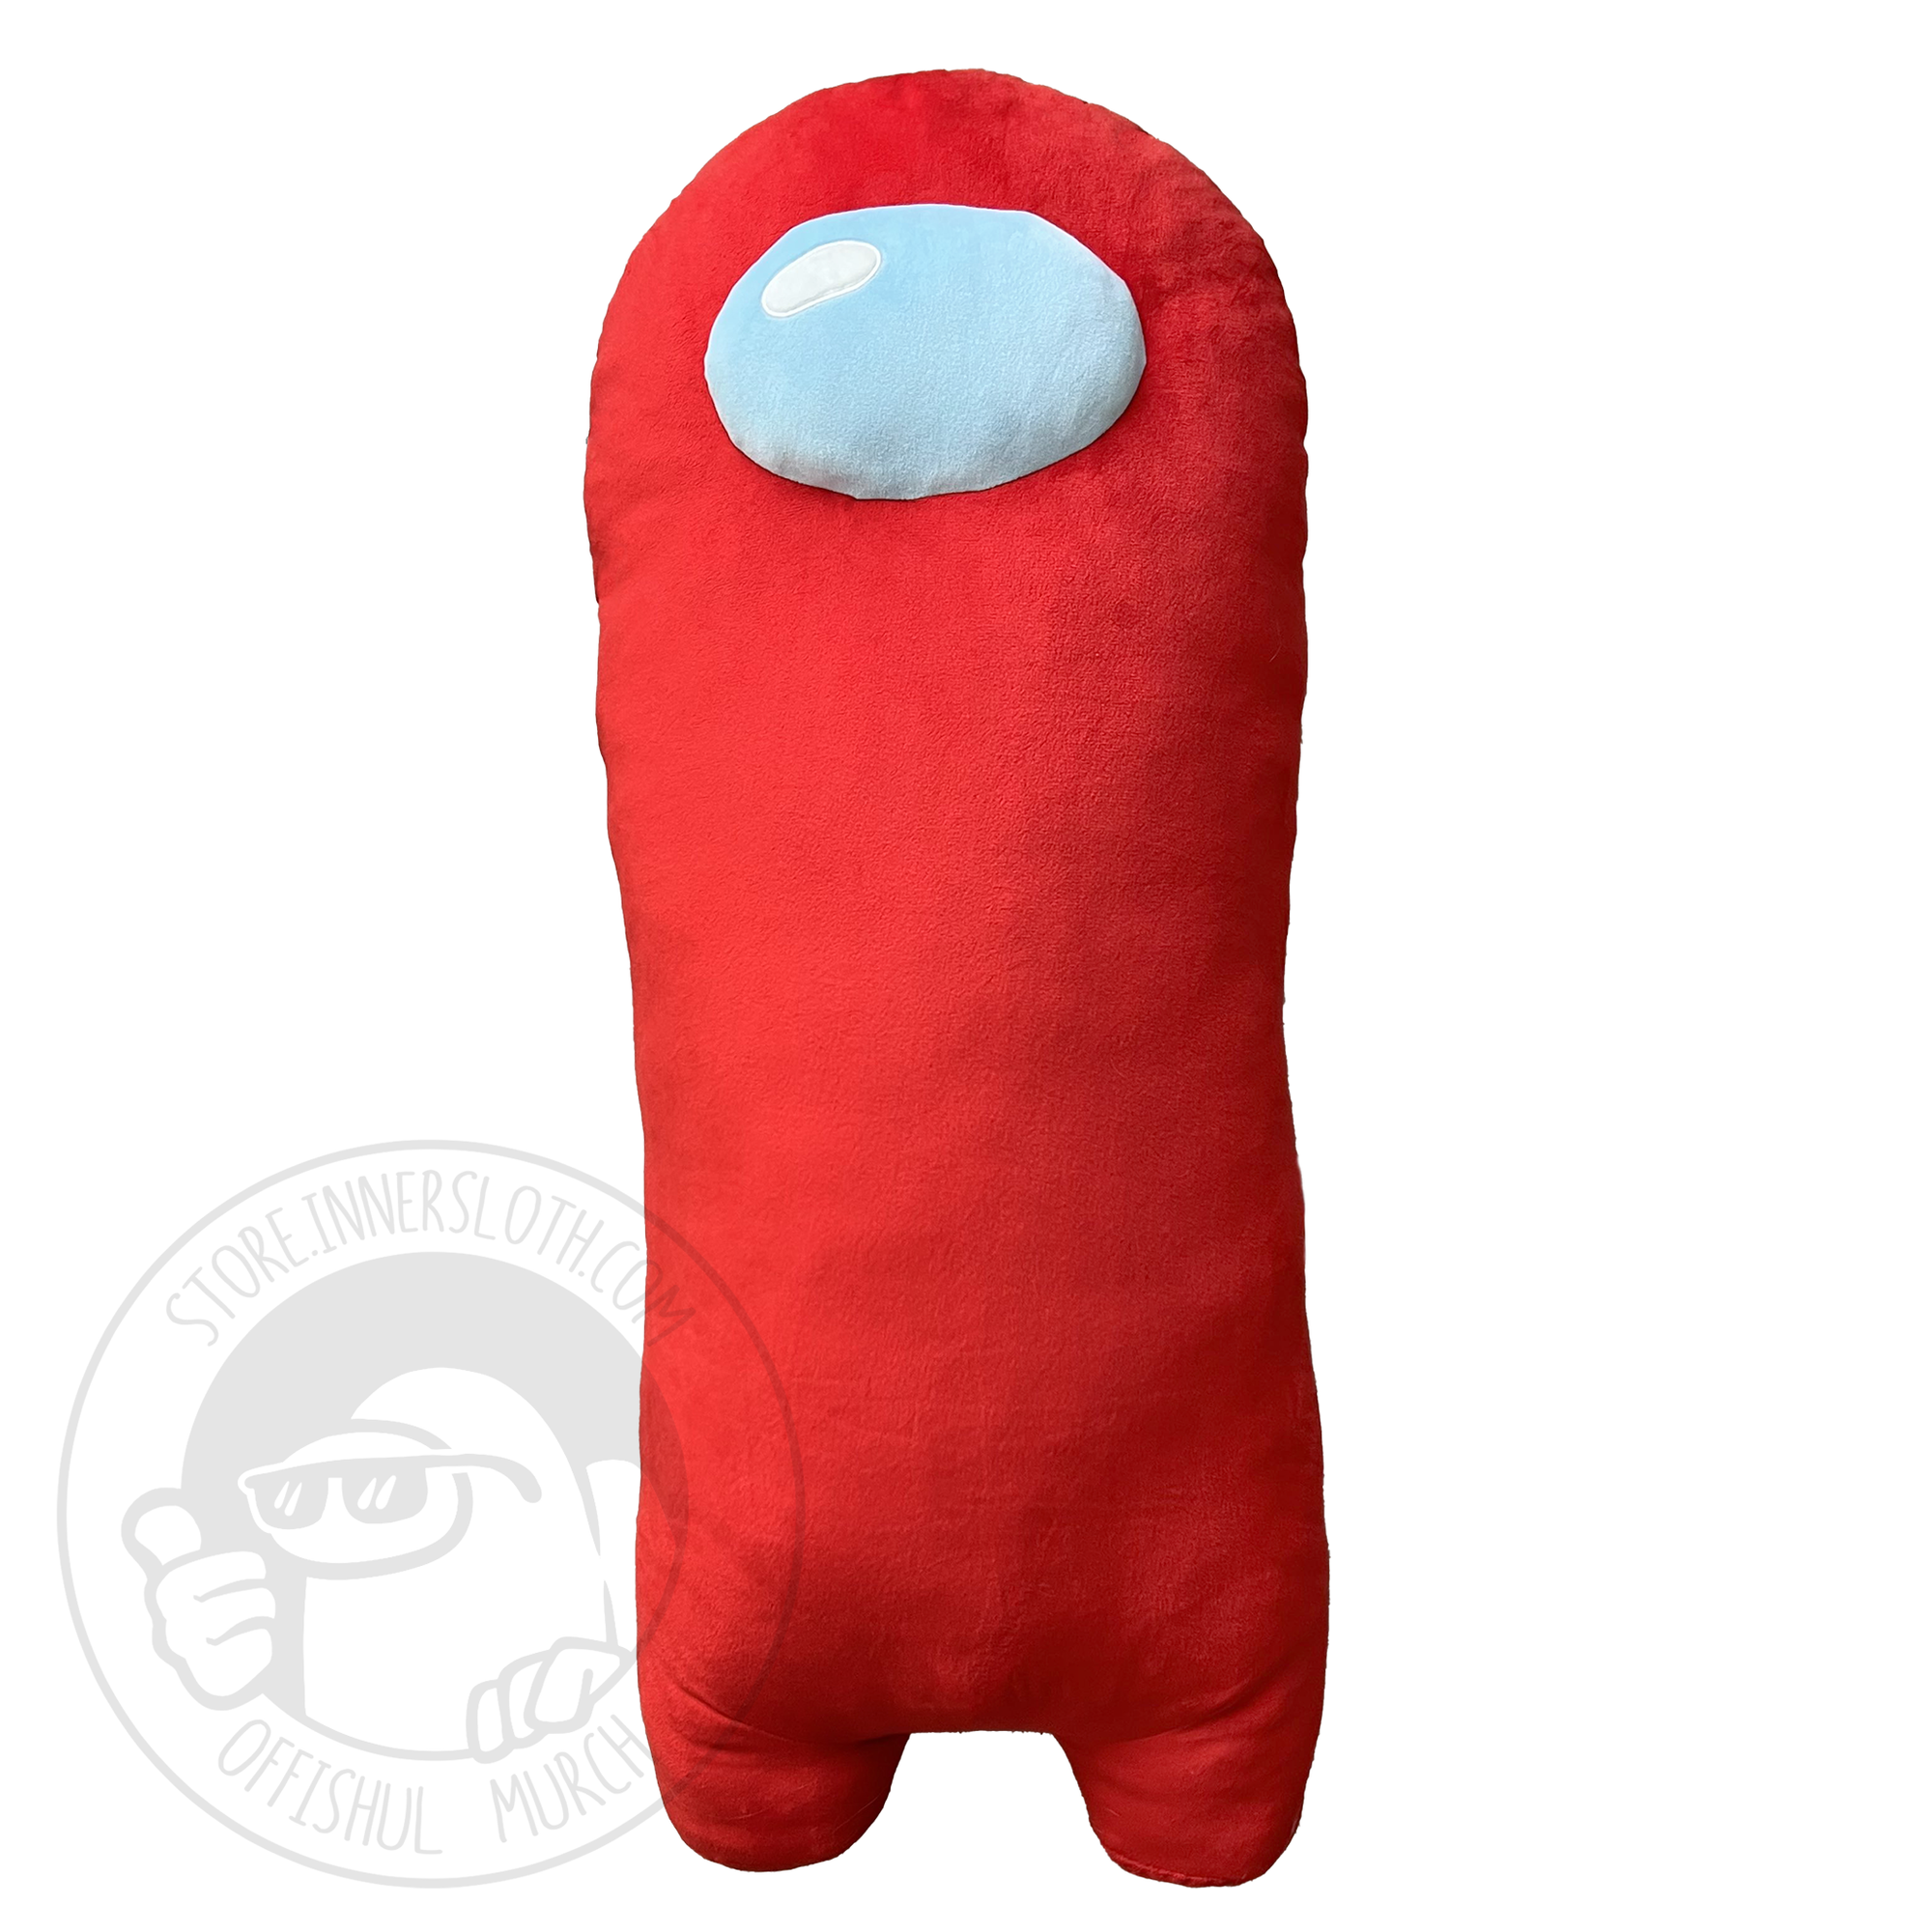 The front view of a very loooooong Red Crewmate plush with a rounded blue oval visor